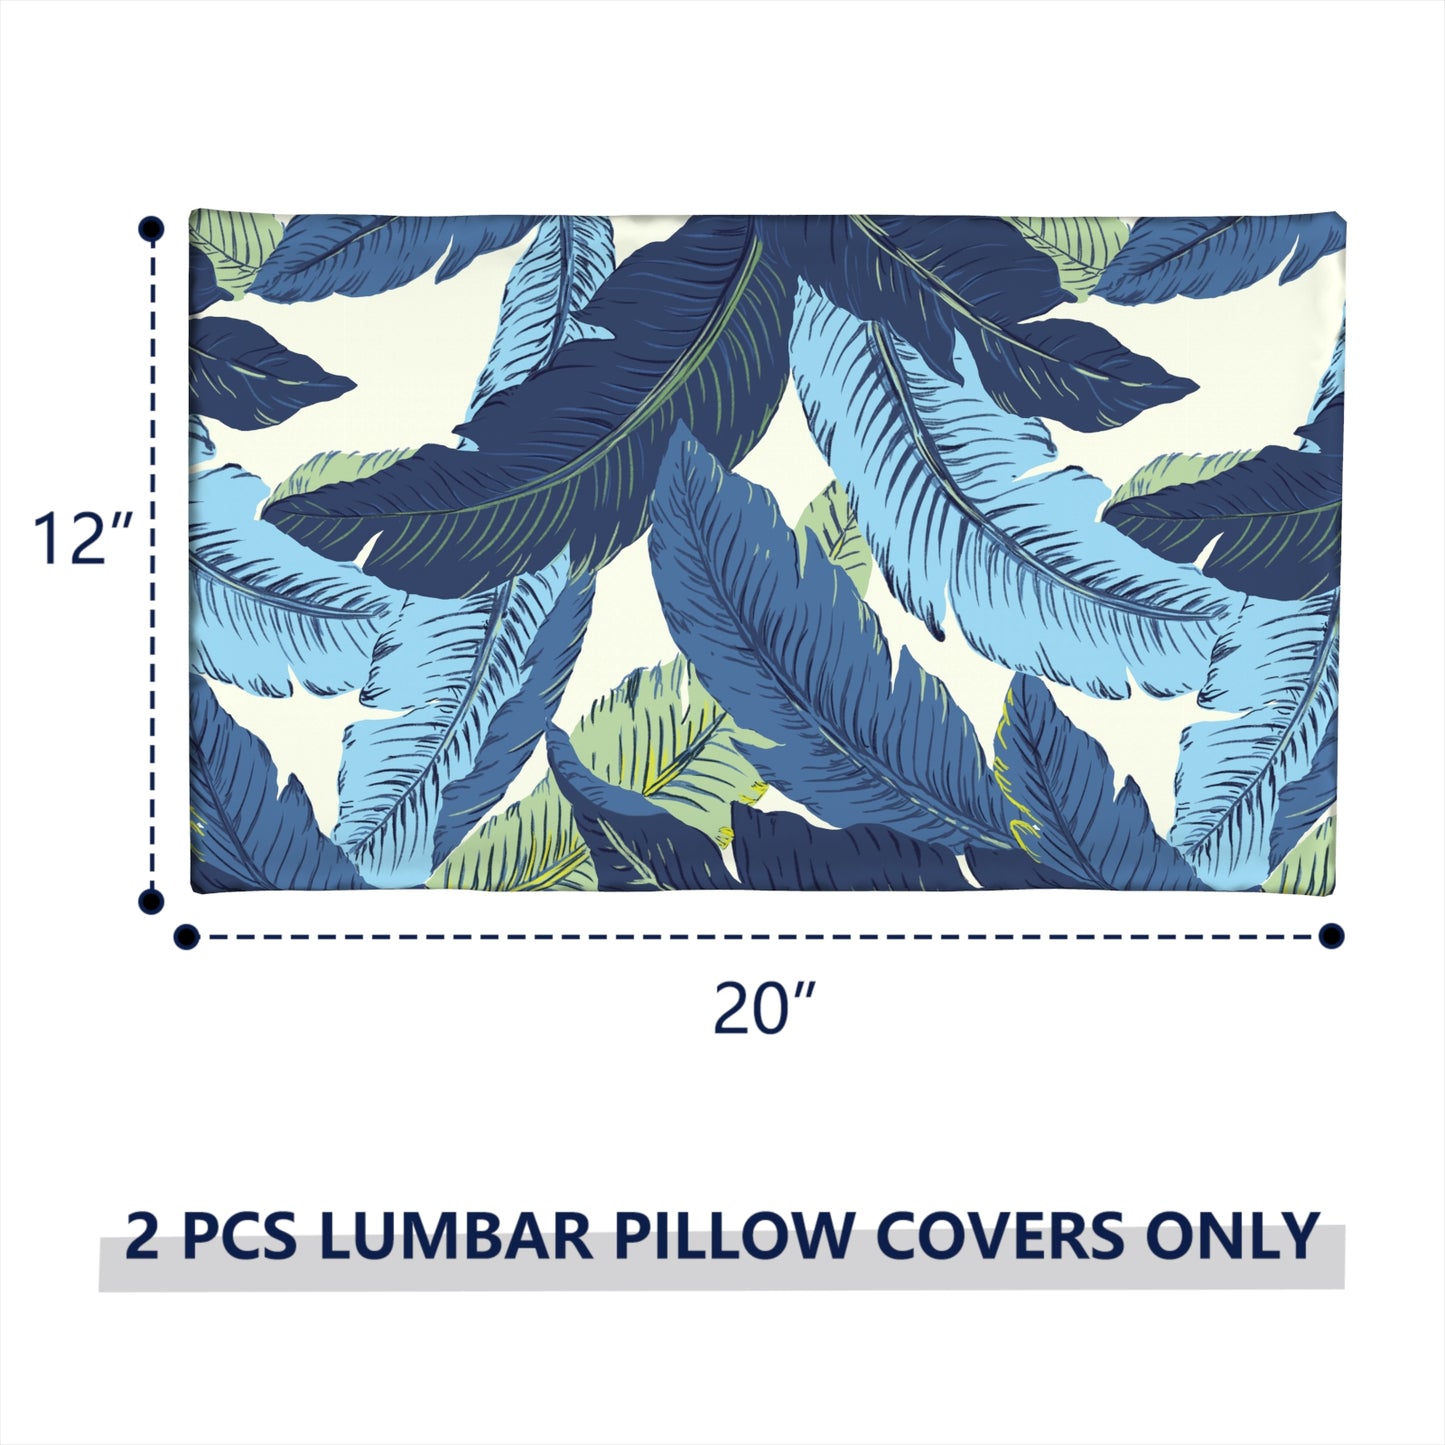 Melody Elephant Pack of 2 Outdoor Lumbar Pillow Covers, All Weather Cushion Pillow Cases 12x20 Inch, Pillowcase for Patio Couch Decoration, Swaying Palms Blue